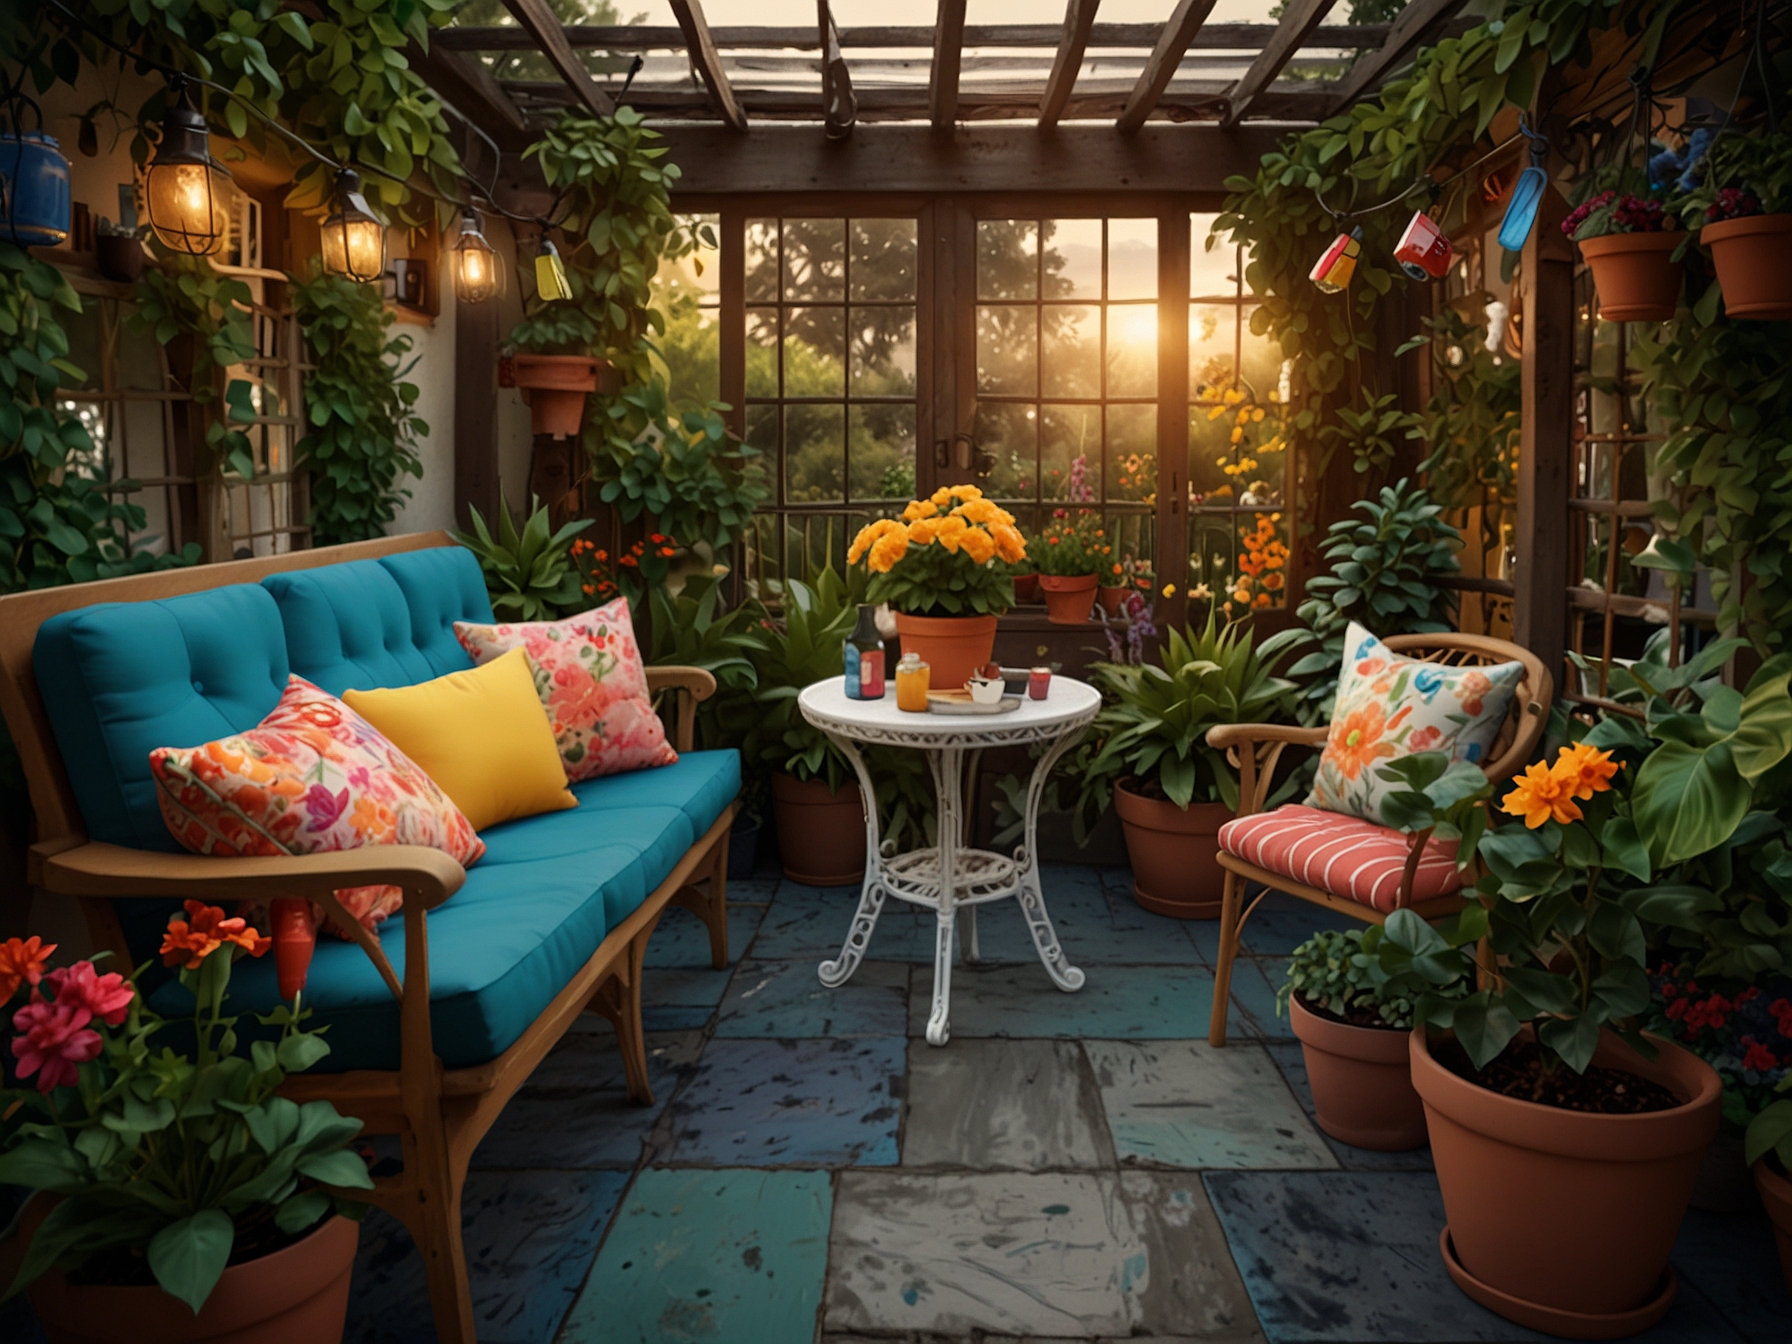 An artist’s vibrant bohemian garden featuring vintage furniture, colorful cushions, potted plants in mismatched pots, flowering vines on trellises, and fairy lights creating an enchanting ambiance.